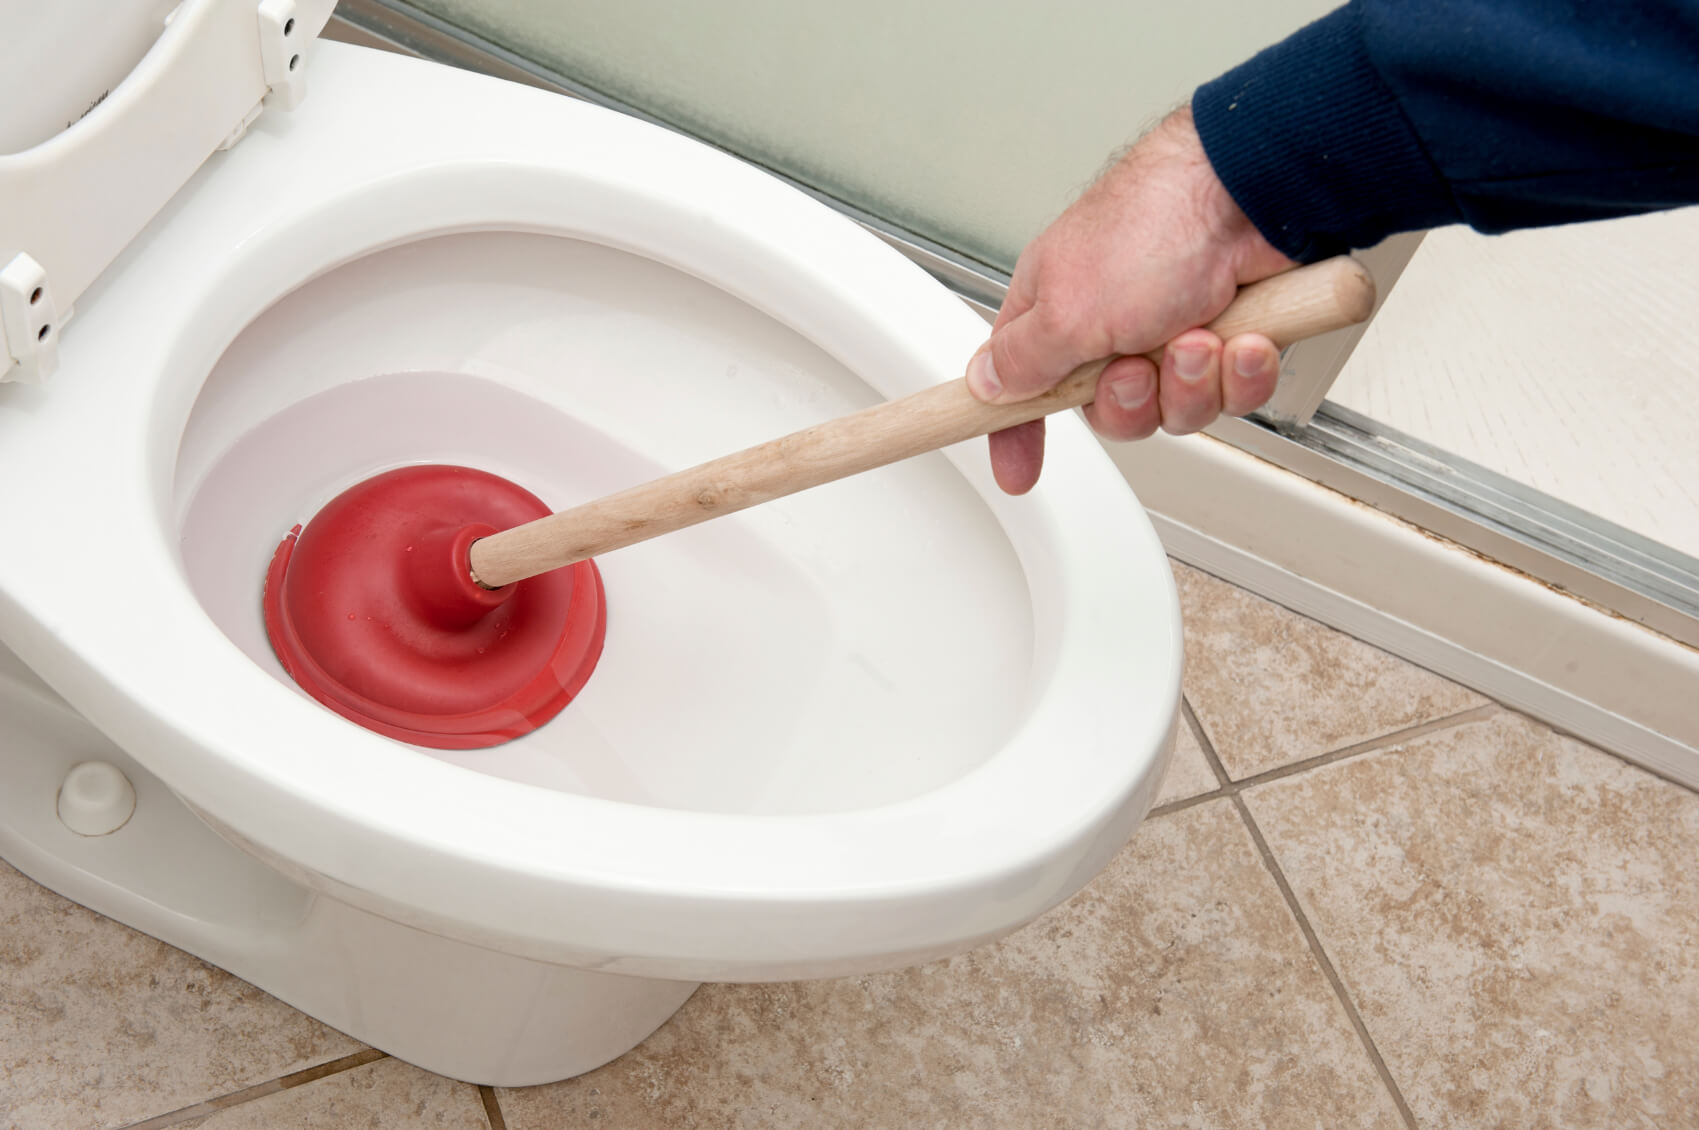 How To Plunge a Toilet With a Cheap Plunger